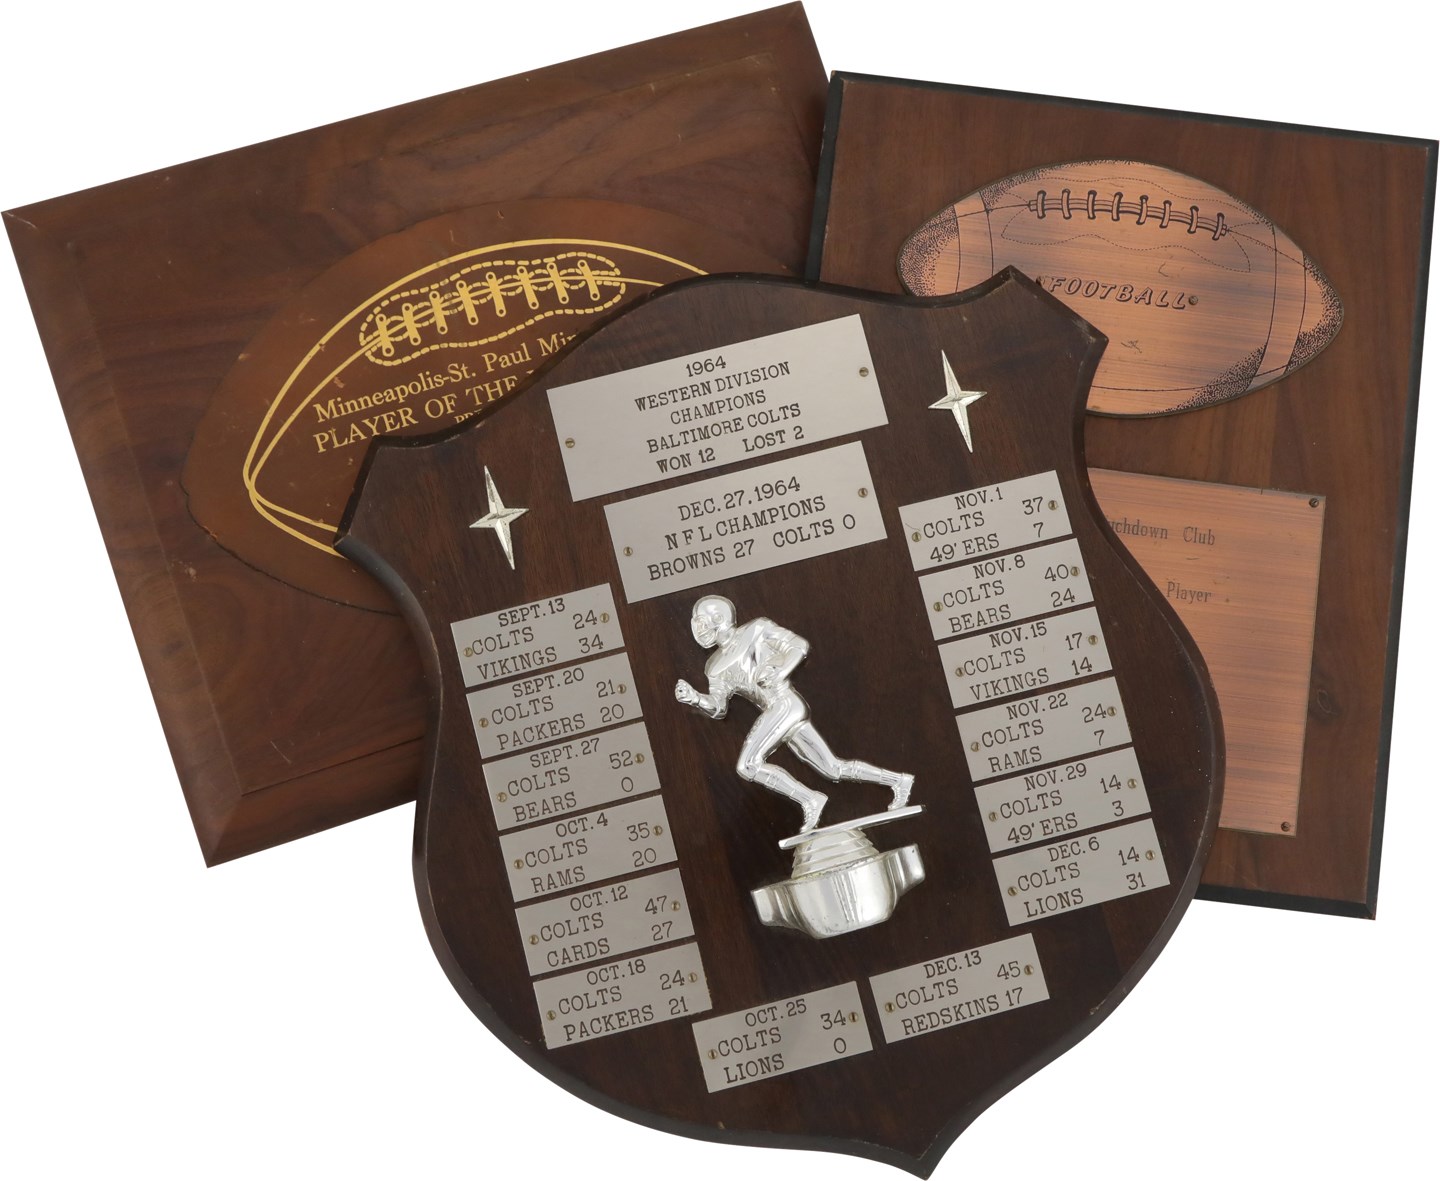 - Tom Matte Baltimore Colts Award Collection Including 1964 Western Division Champs Plaque (3 - 2 signed)